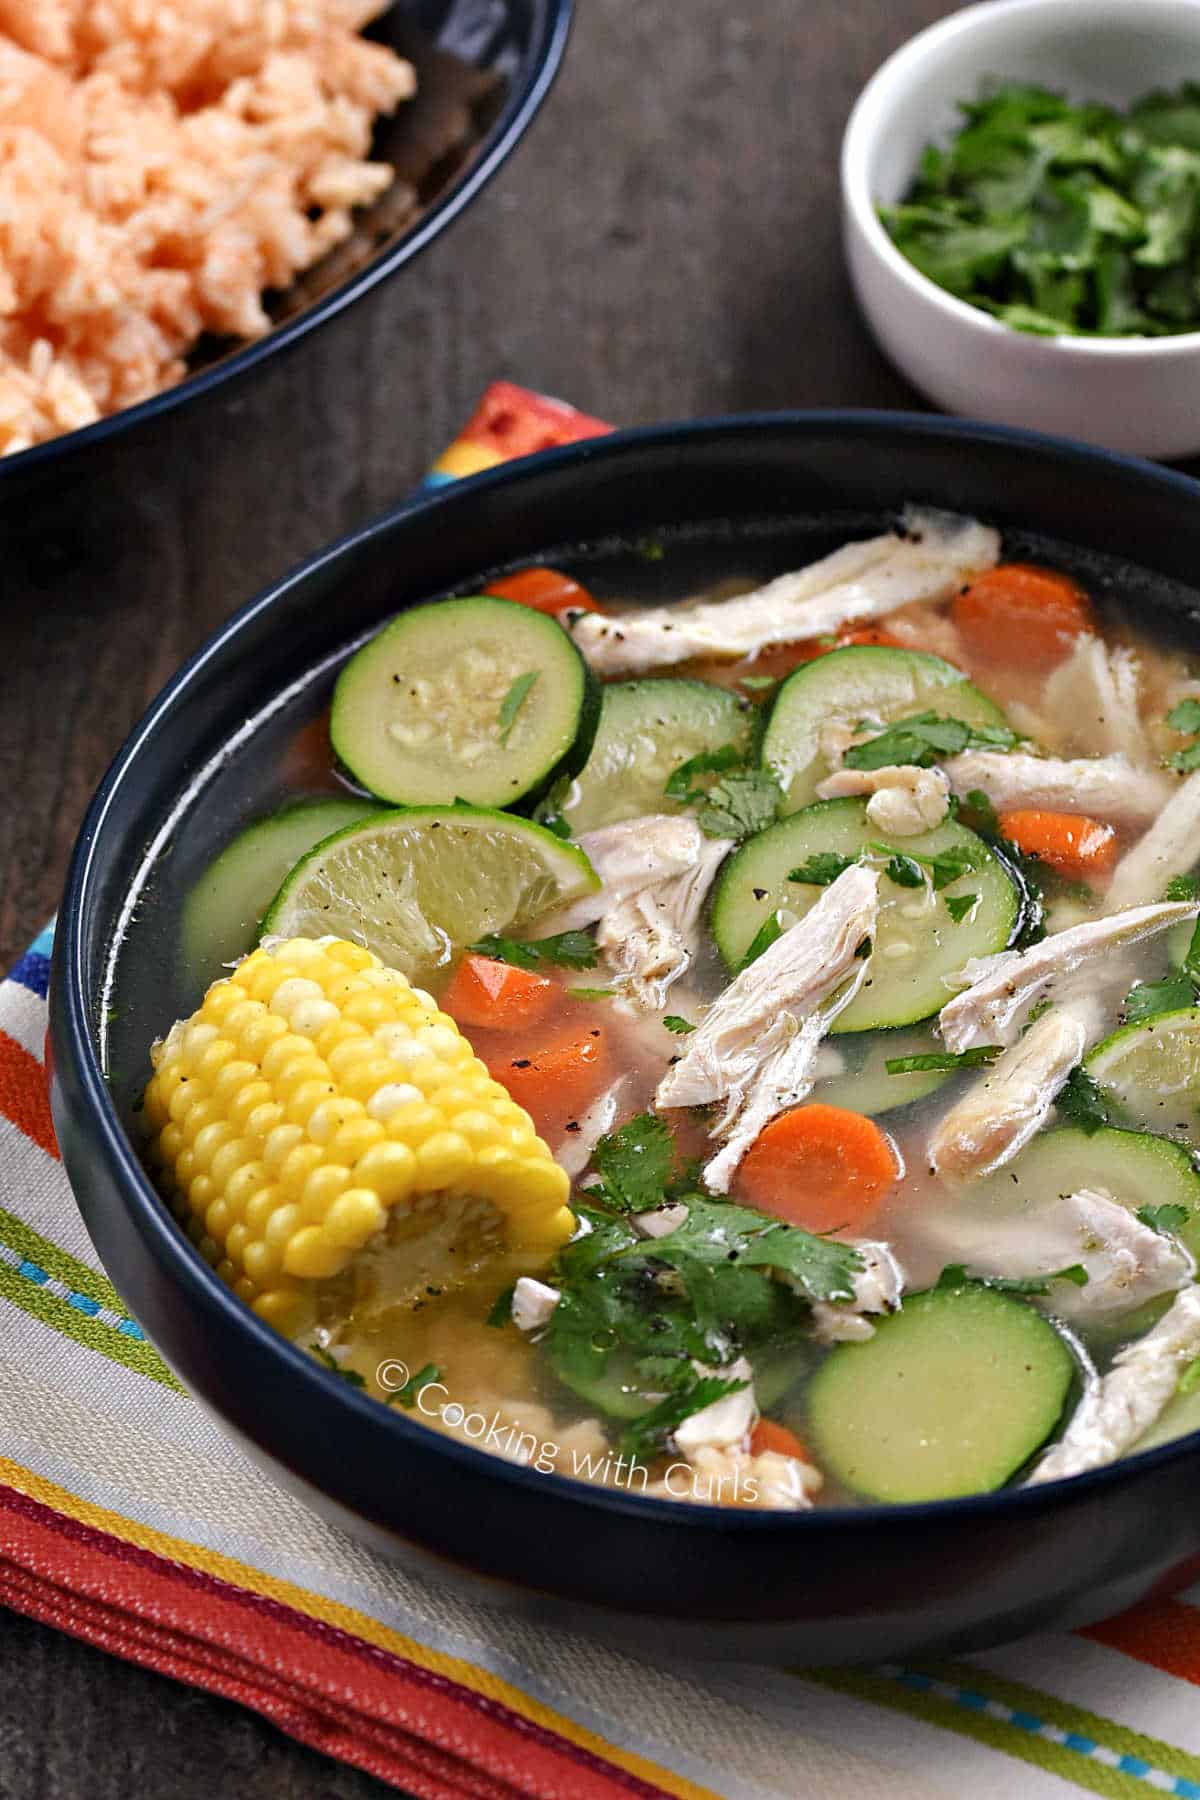 Chicken, sliced zucchini, carrots, and corn on the cob in a bowl with bowls of rice and cilantro in the background.